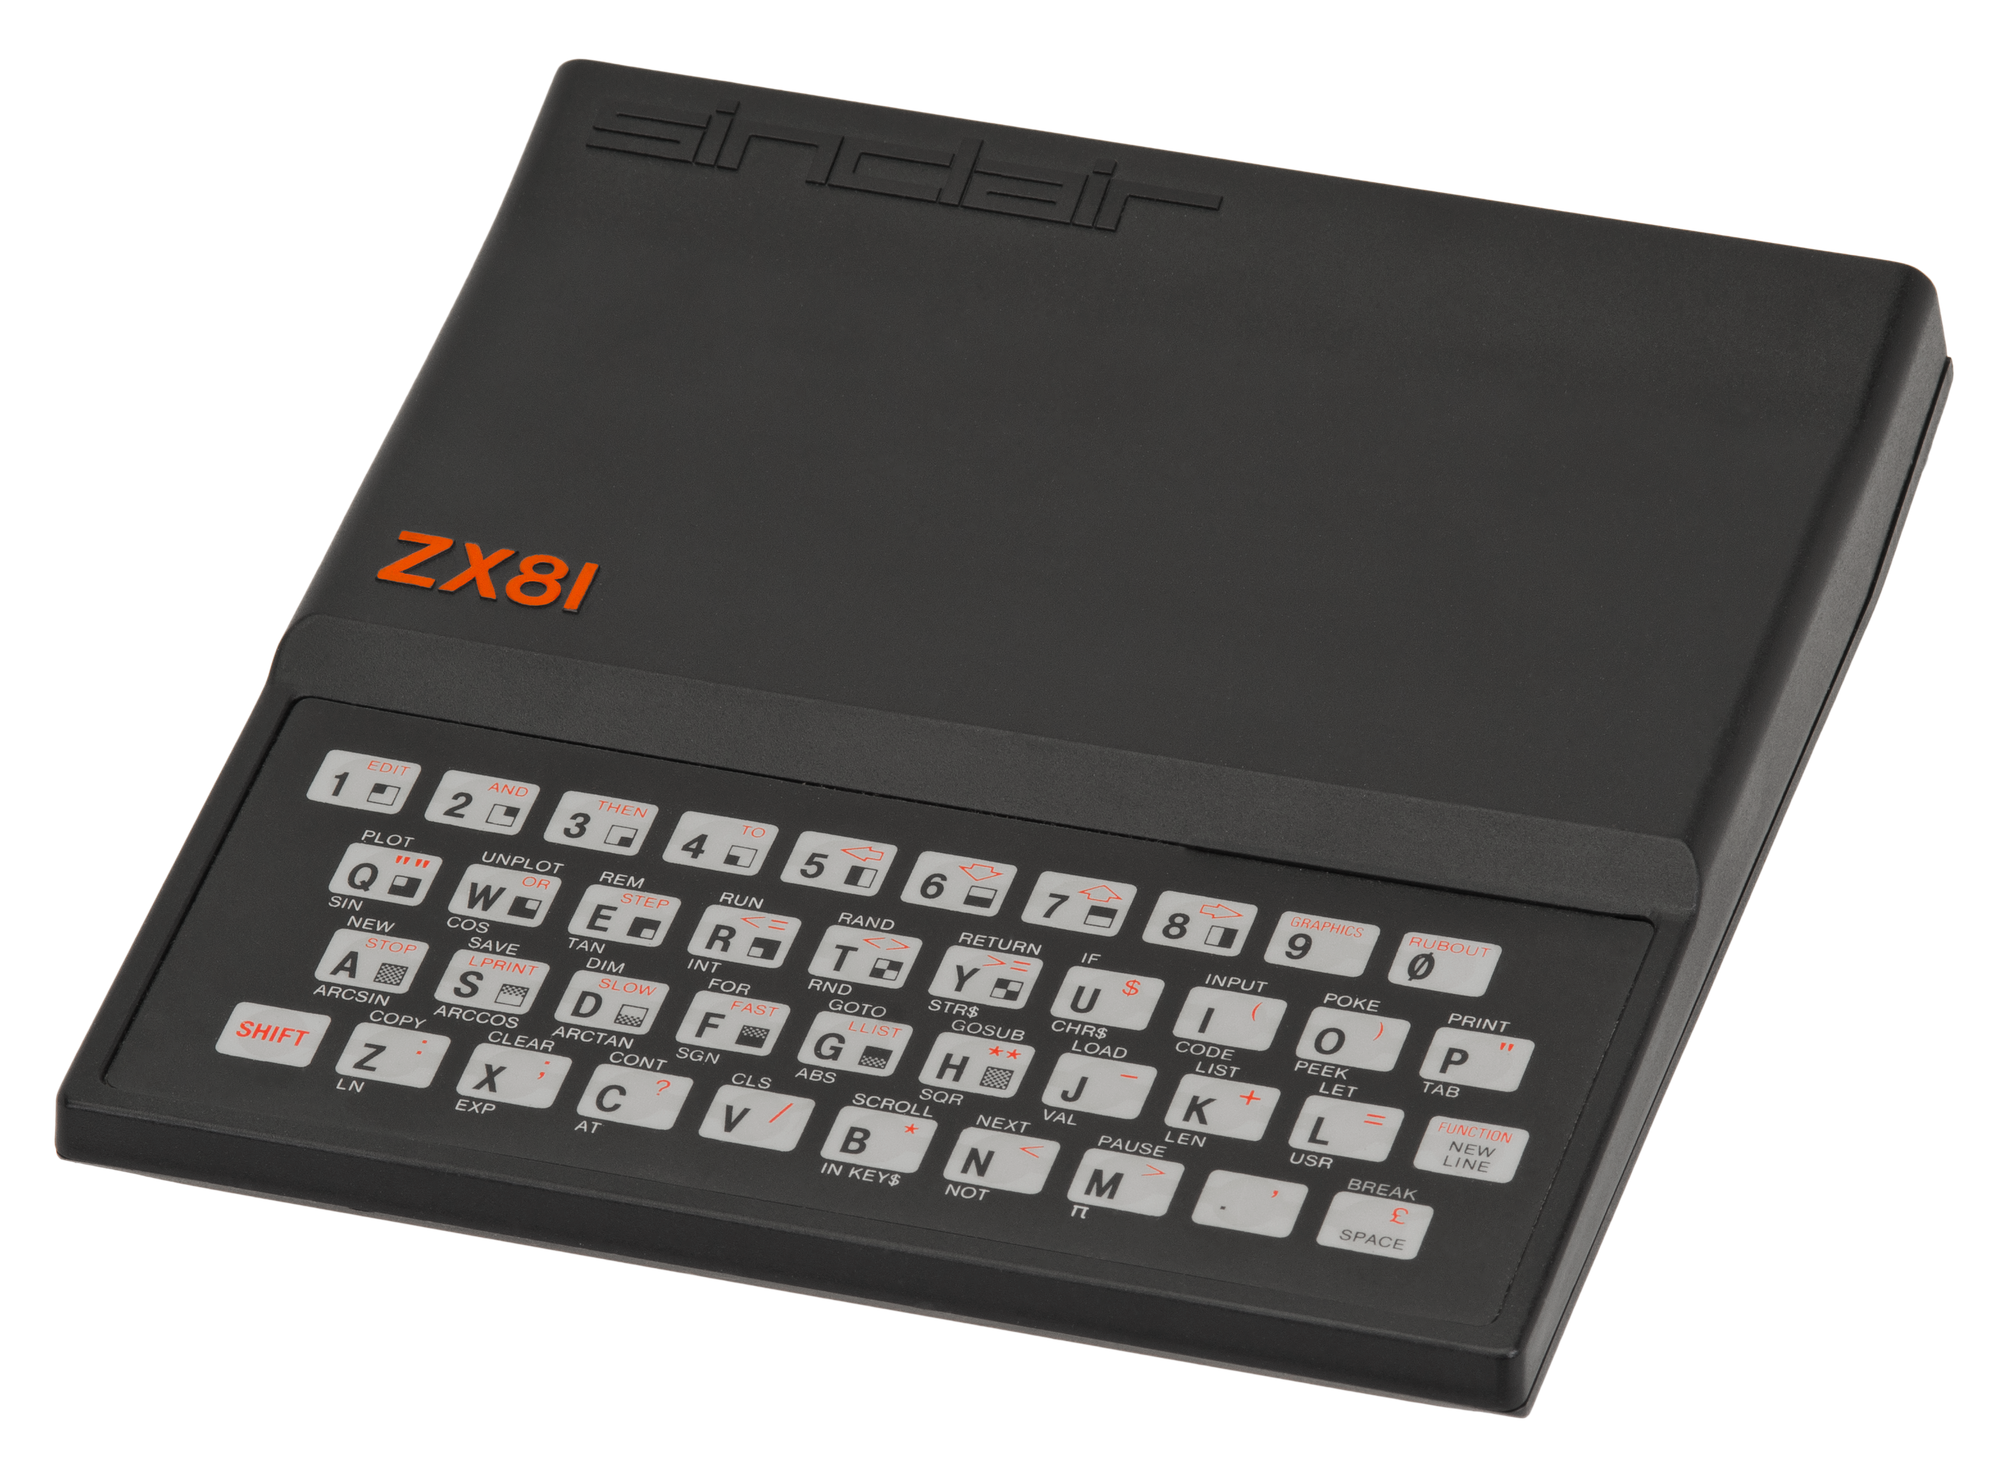 My First Computer - The Sinclair ZX81